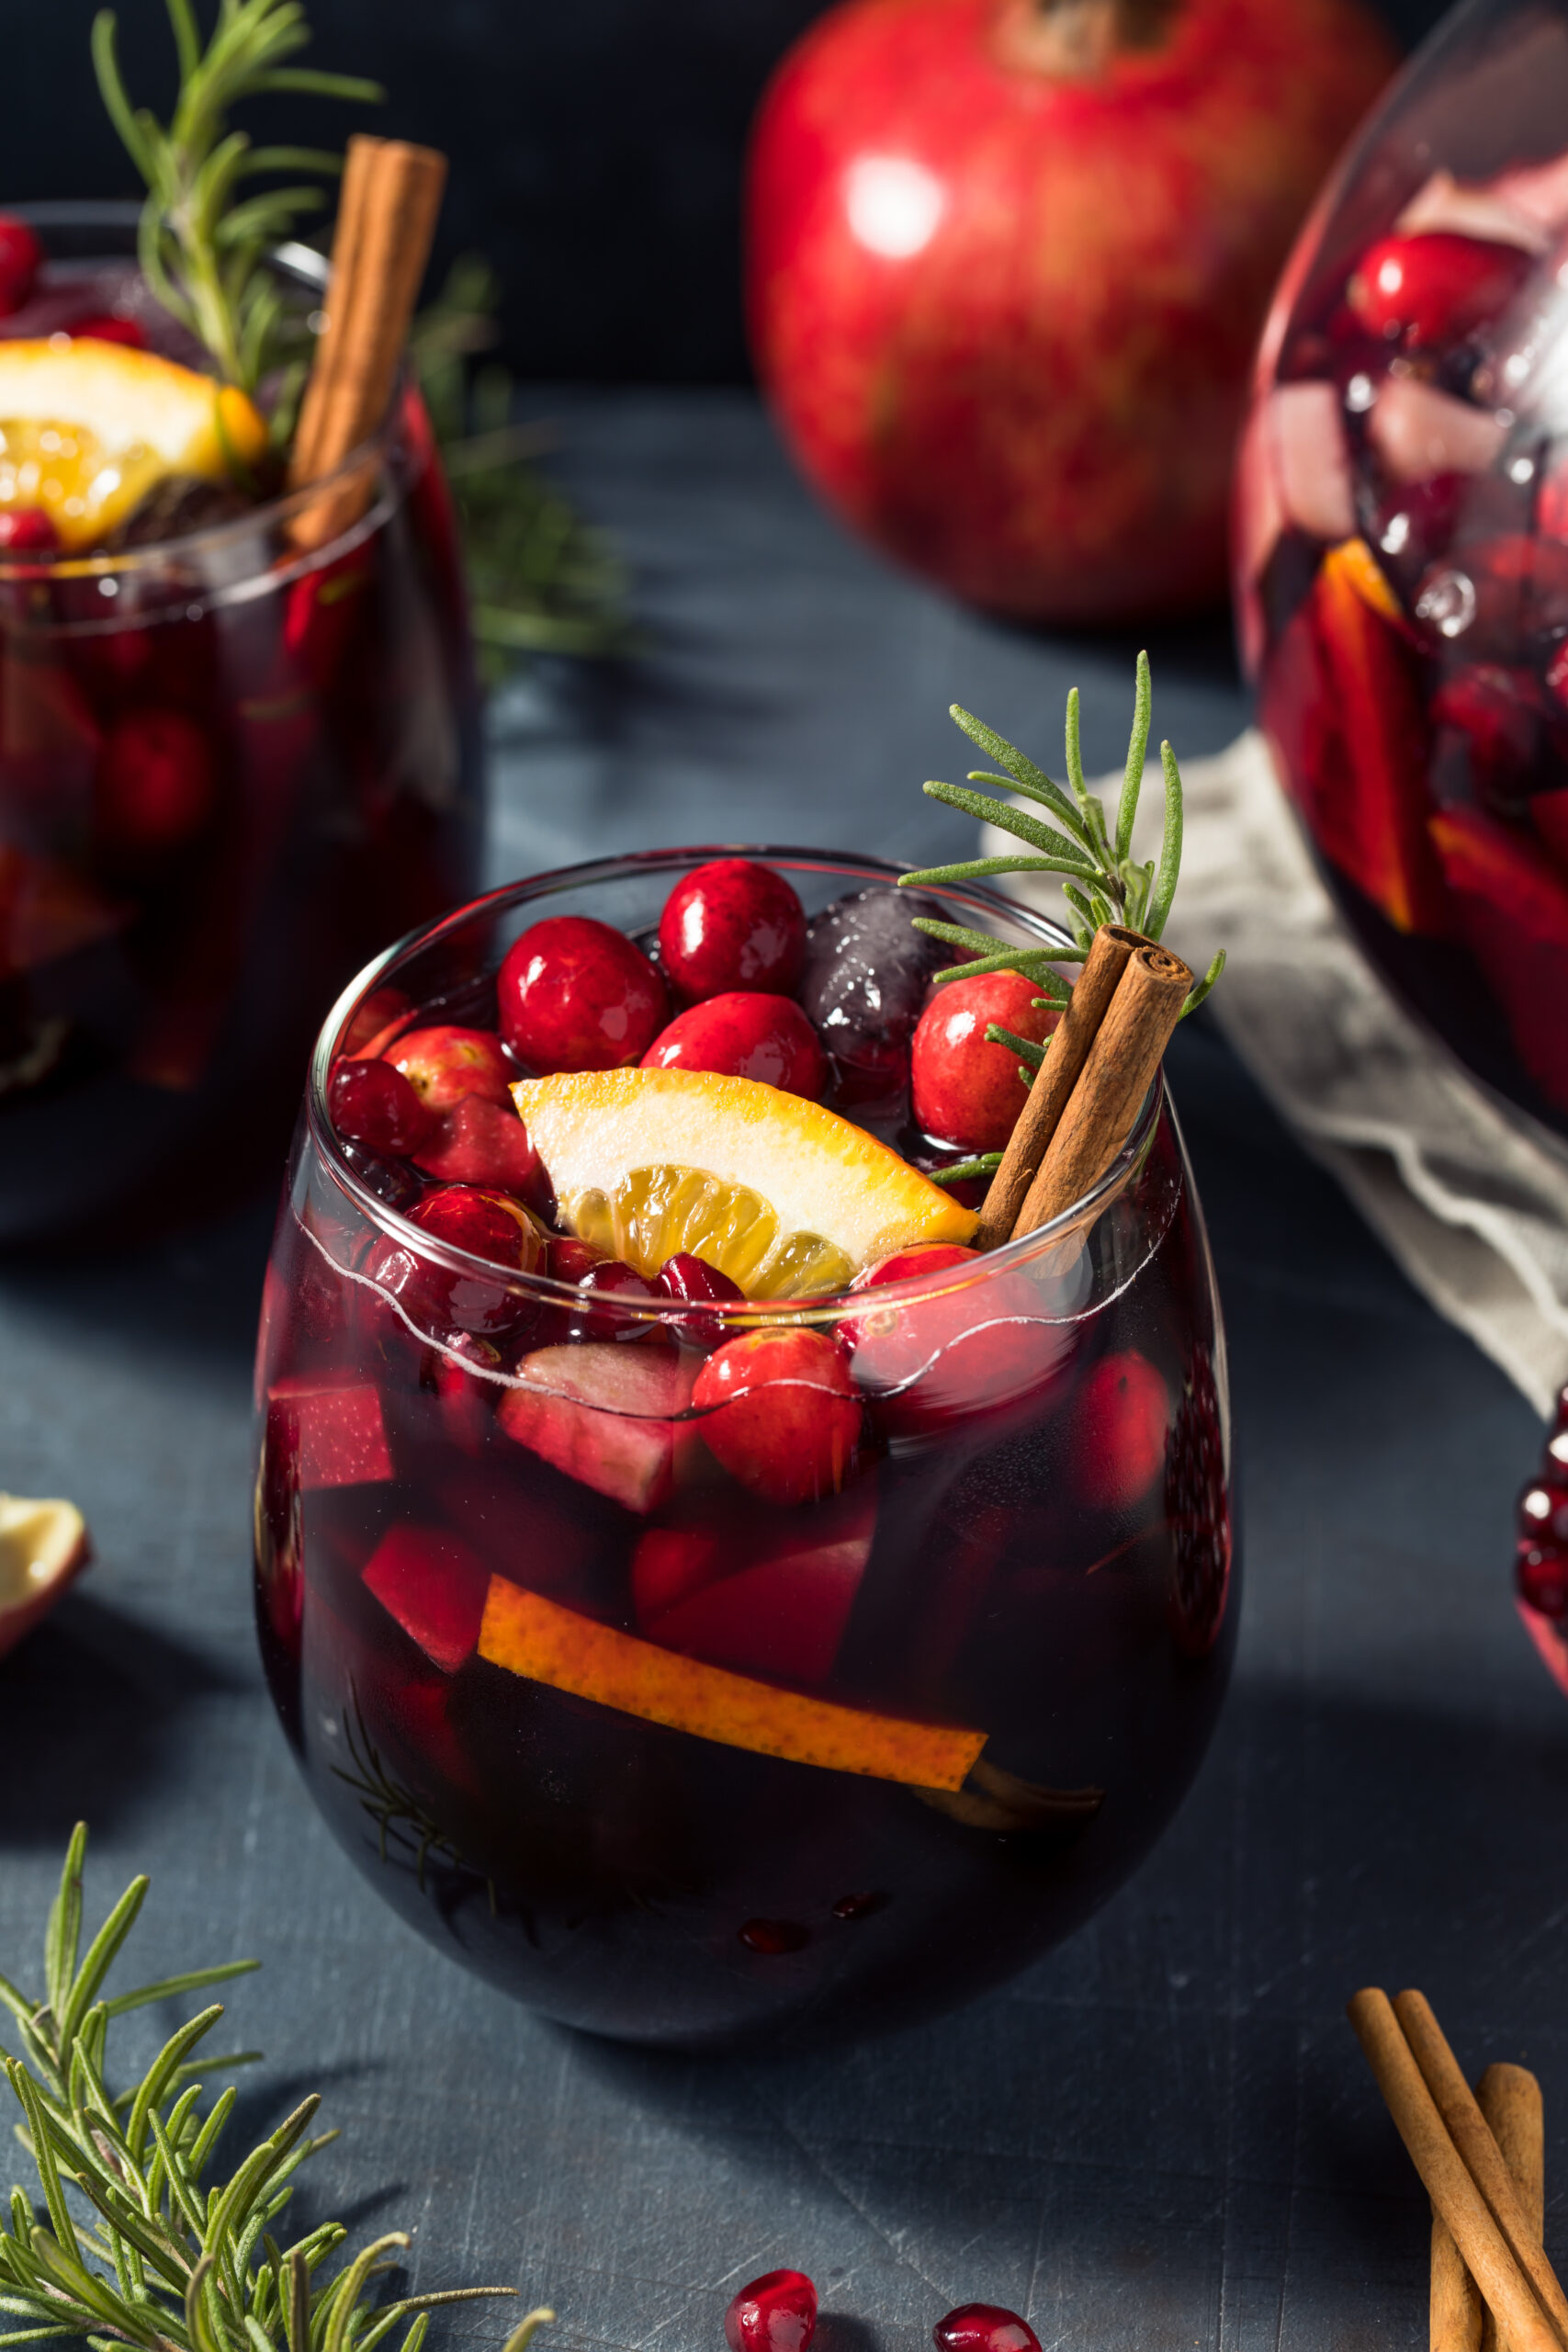 Red Christmas Sangria Recipe; made with red wine, brandy cranberry pomegranate juice, sparkling apple cider and fruit. Topped with cinnamon sticks and rosemary to garnish